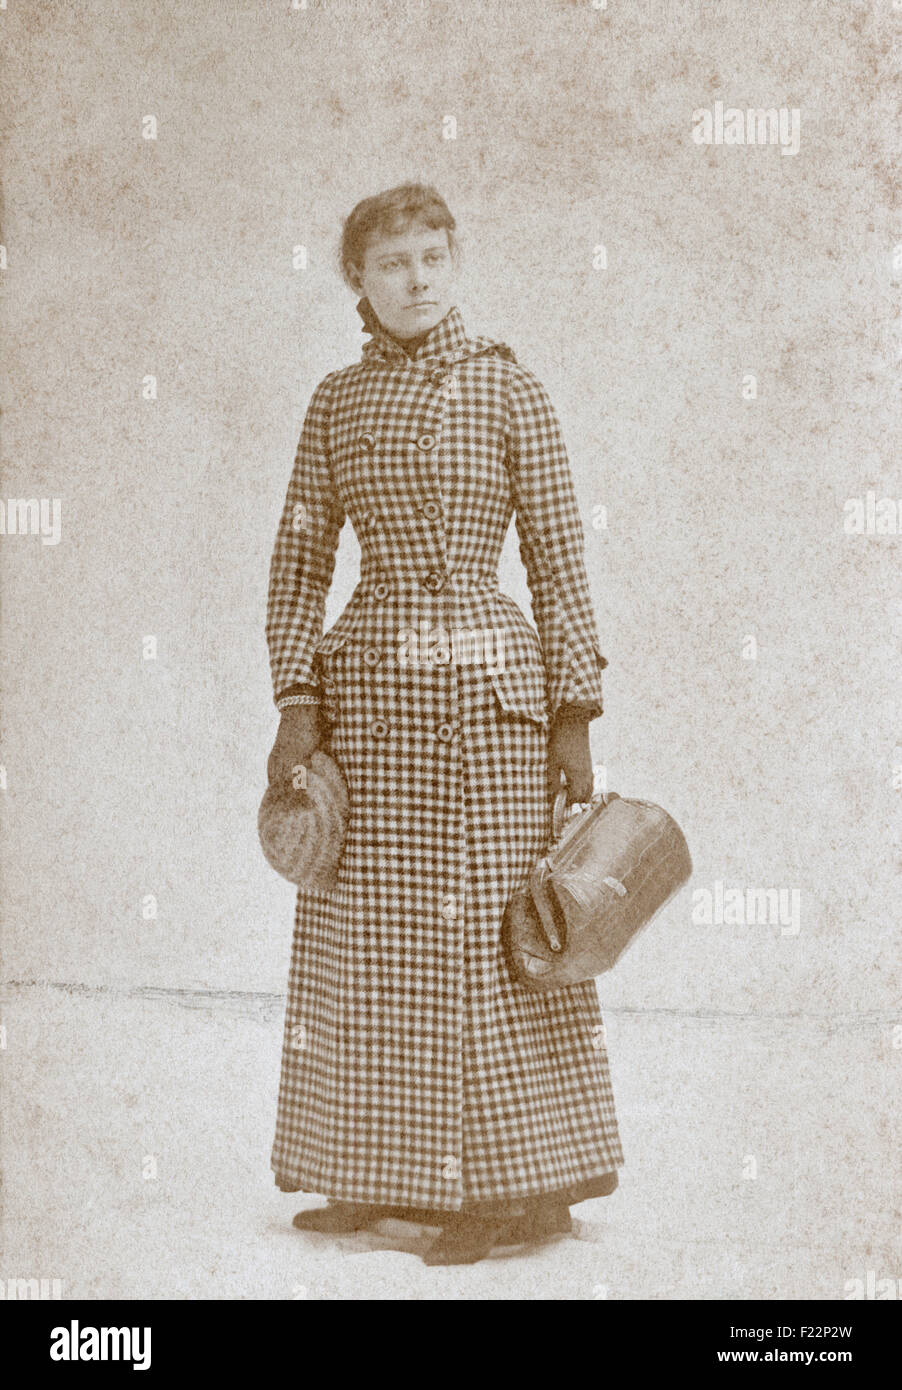 Antique 1890 cabinet card photograph of Nellie Bly, wearing her around-the-world voyage outfit, by Myers of New York. Nellie Bly (1864-1922) was the pen name of American journalist Elizabeth Cochrane Seaman. She was also a writer, industrialist, inventor, and a charity worker who was widely known for her record-breaking trip around the world in 72 days, and an exposé in which she faked insanity to study a mental institution from within. She was a pioneer in her field, and launched a new kind of investigative journalism. Stock Photo